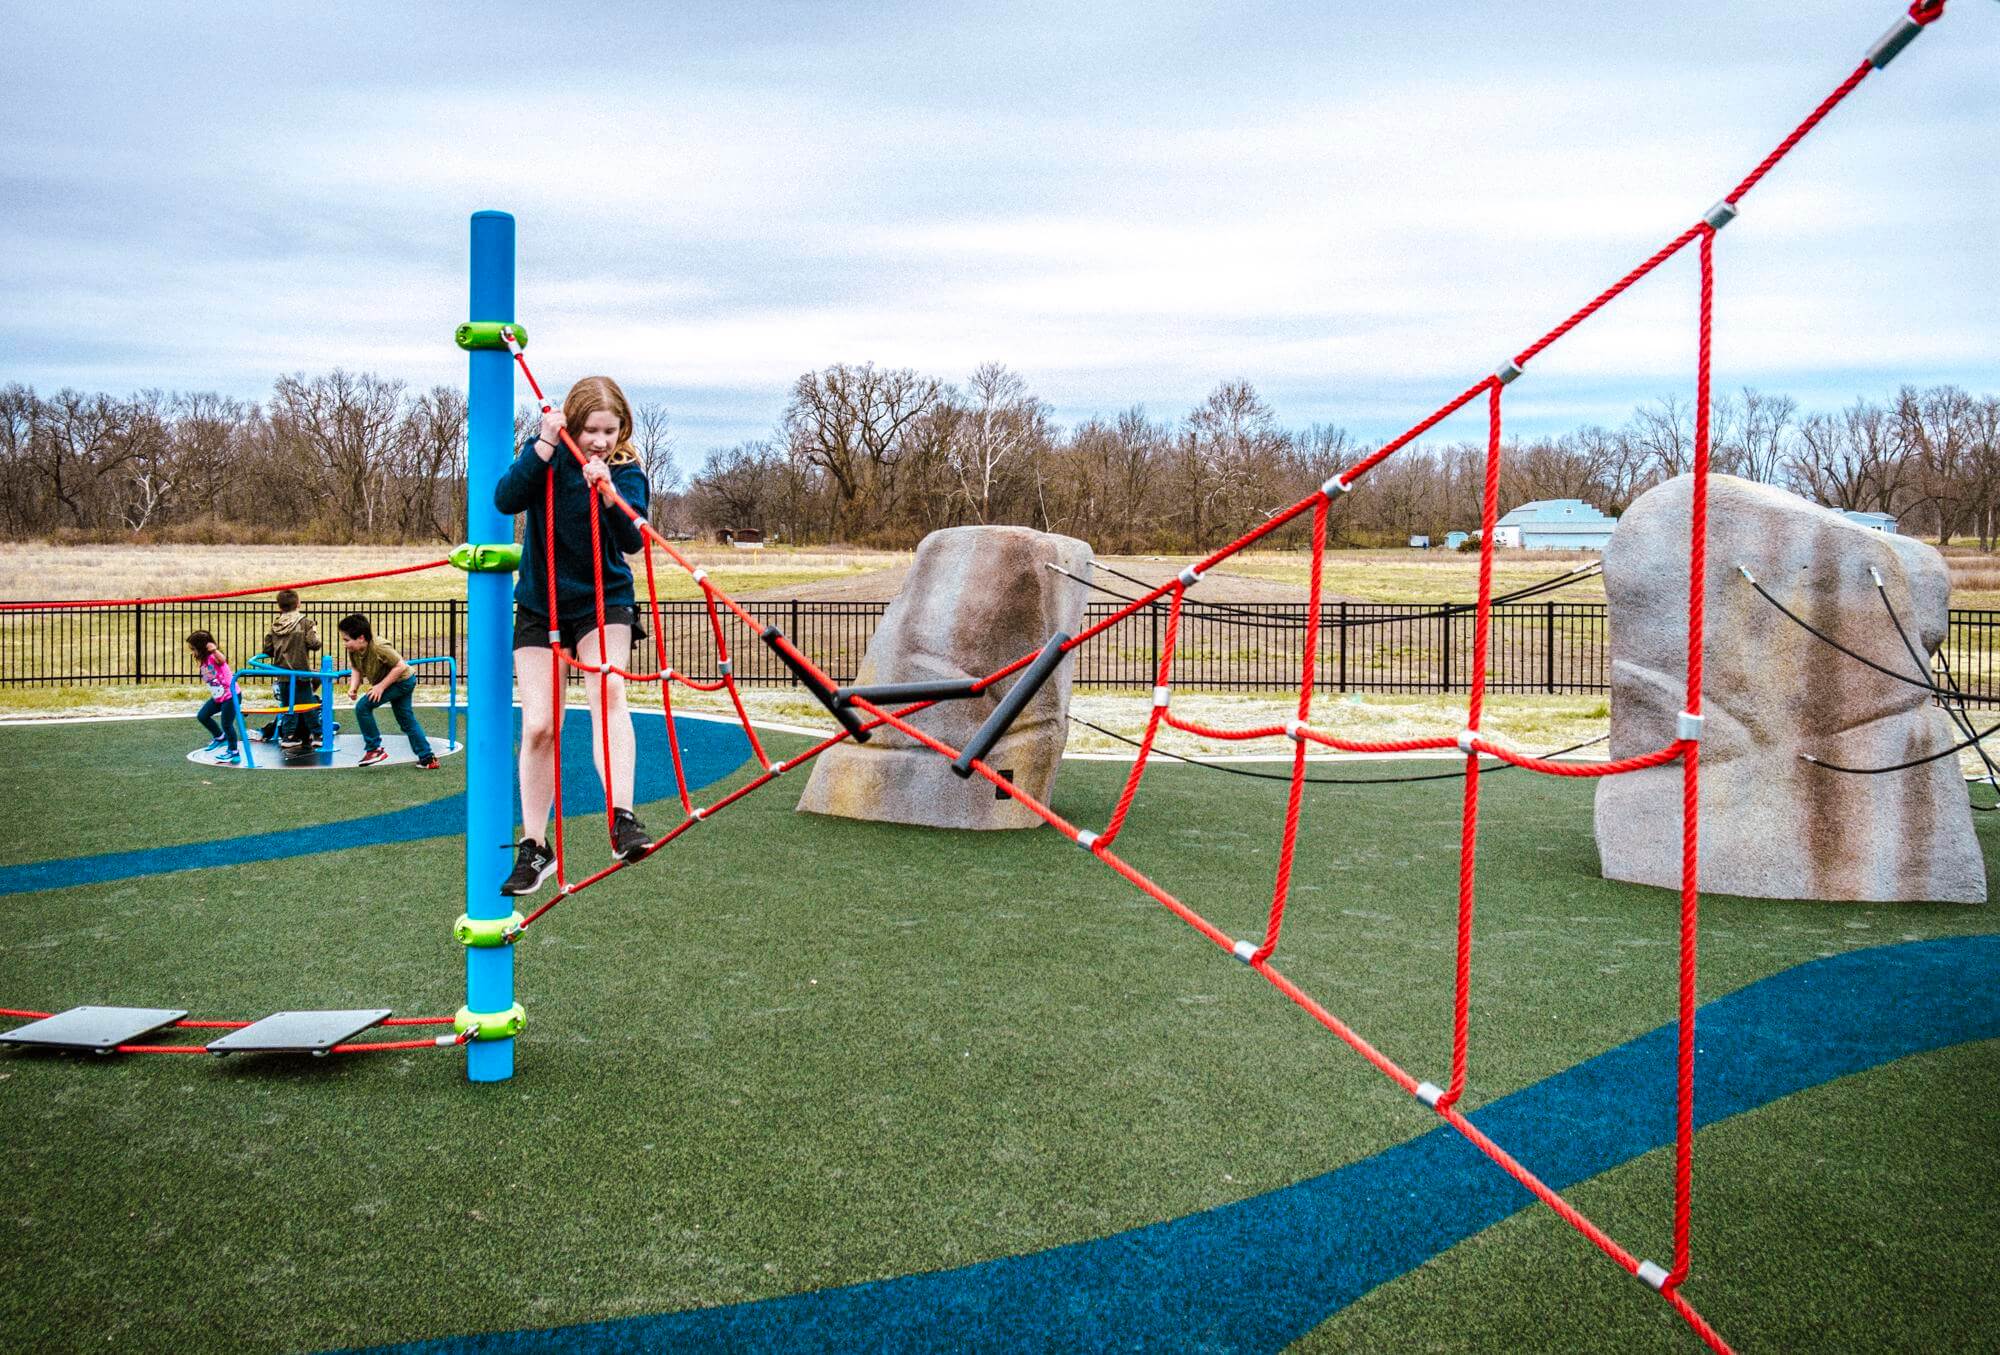 A child in a blue jacket climbing a red rope structure, demonstrating the interactive and challenging elements of the playground.